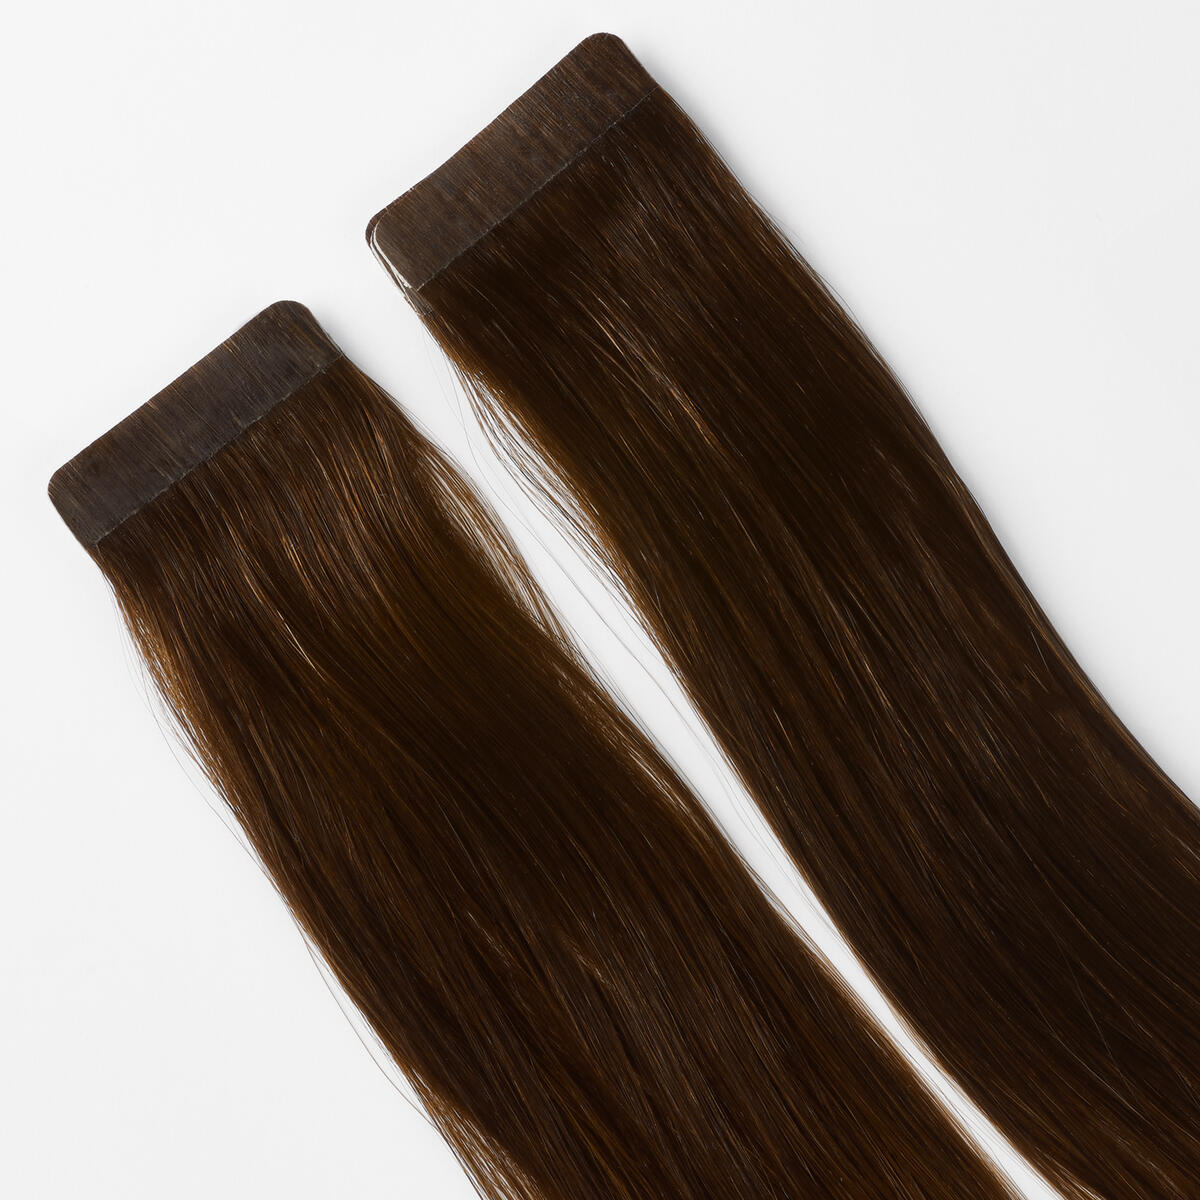 Basic Tape Extensions Classic 4 O2.0/7.5 Medium Brown Ombre 40 cm